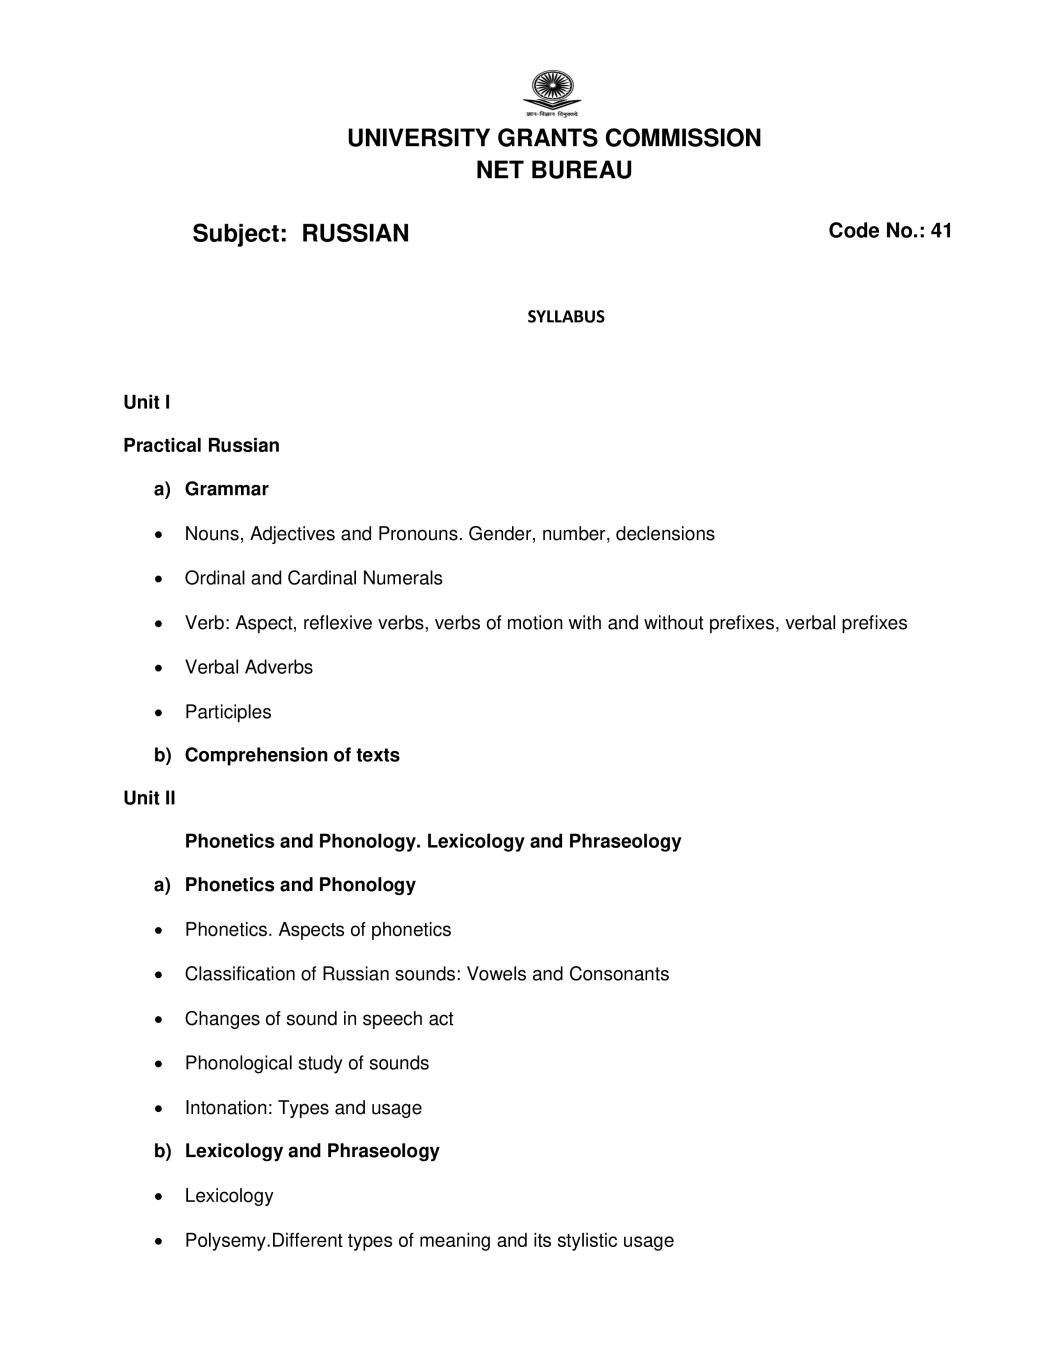 UGC NET Syllabus for Russian 2020 - Page 1